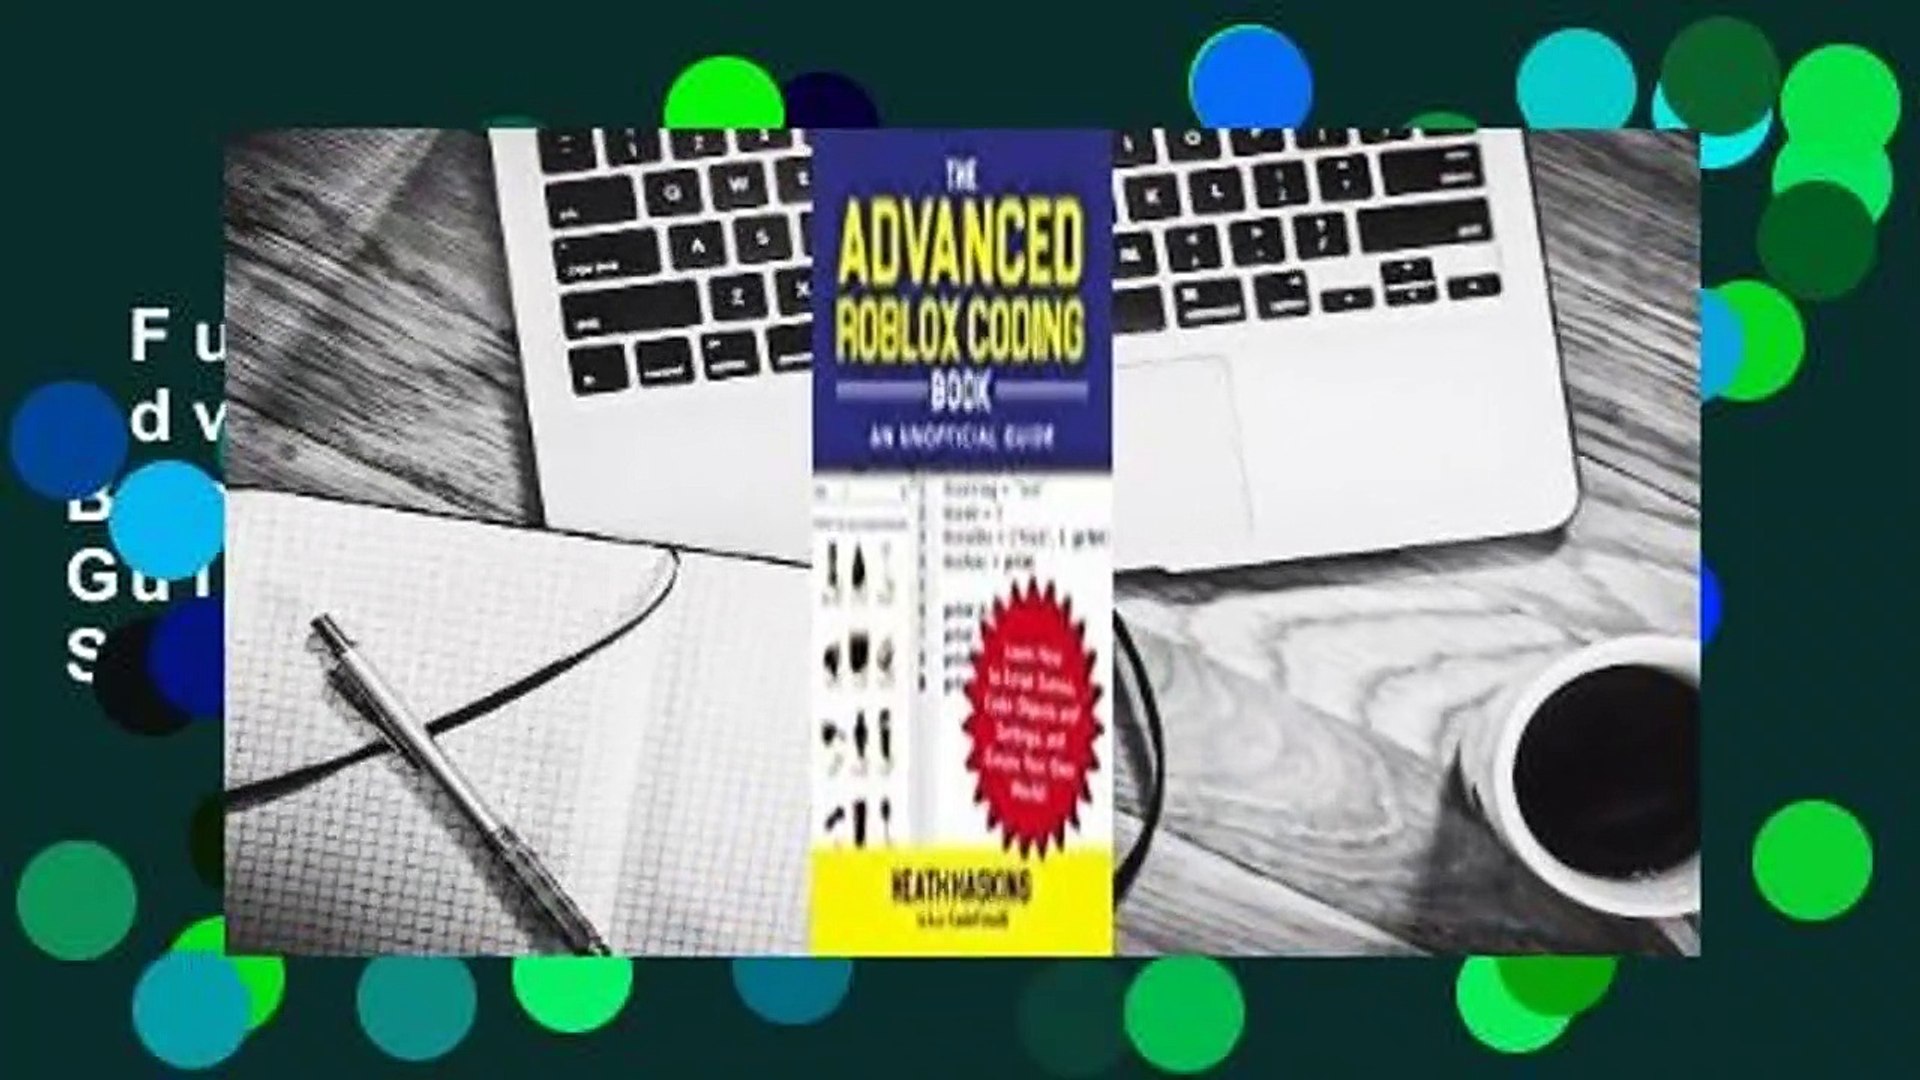 Full Version The Advanced Roblox Coding Book An Unofficial Guide Learn How To Script Games Video Dailymotion - learn roblox coding and scripts